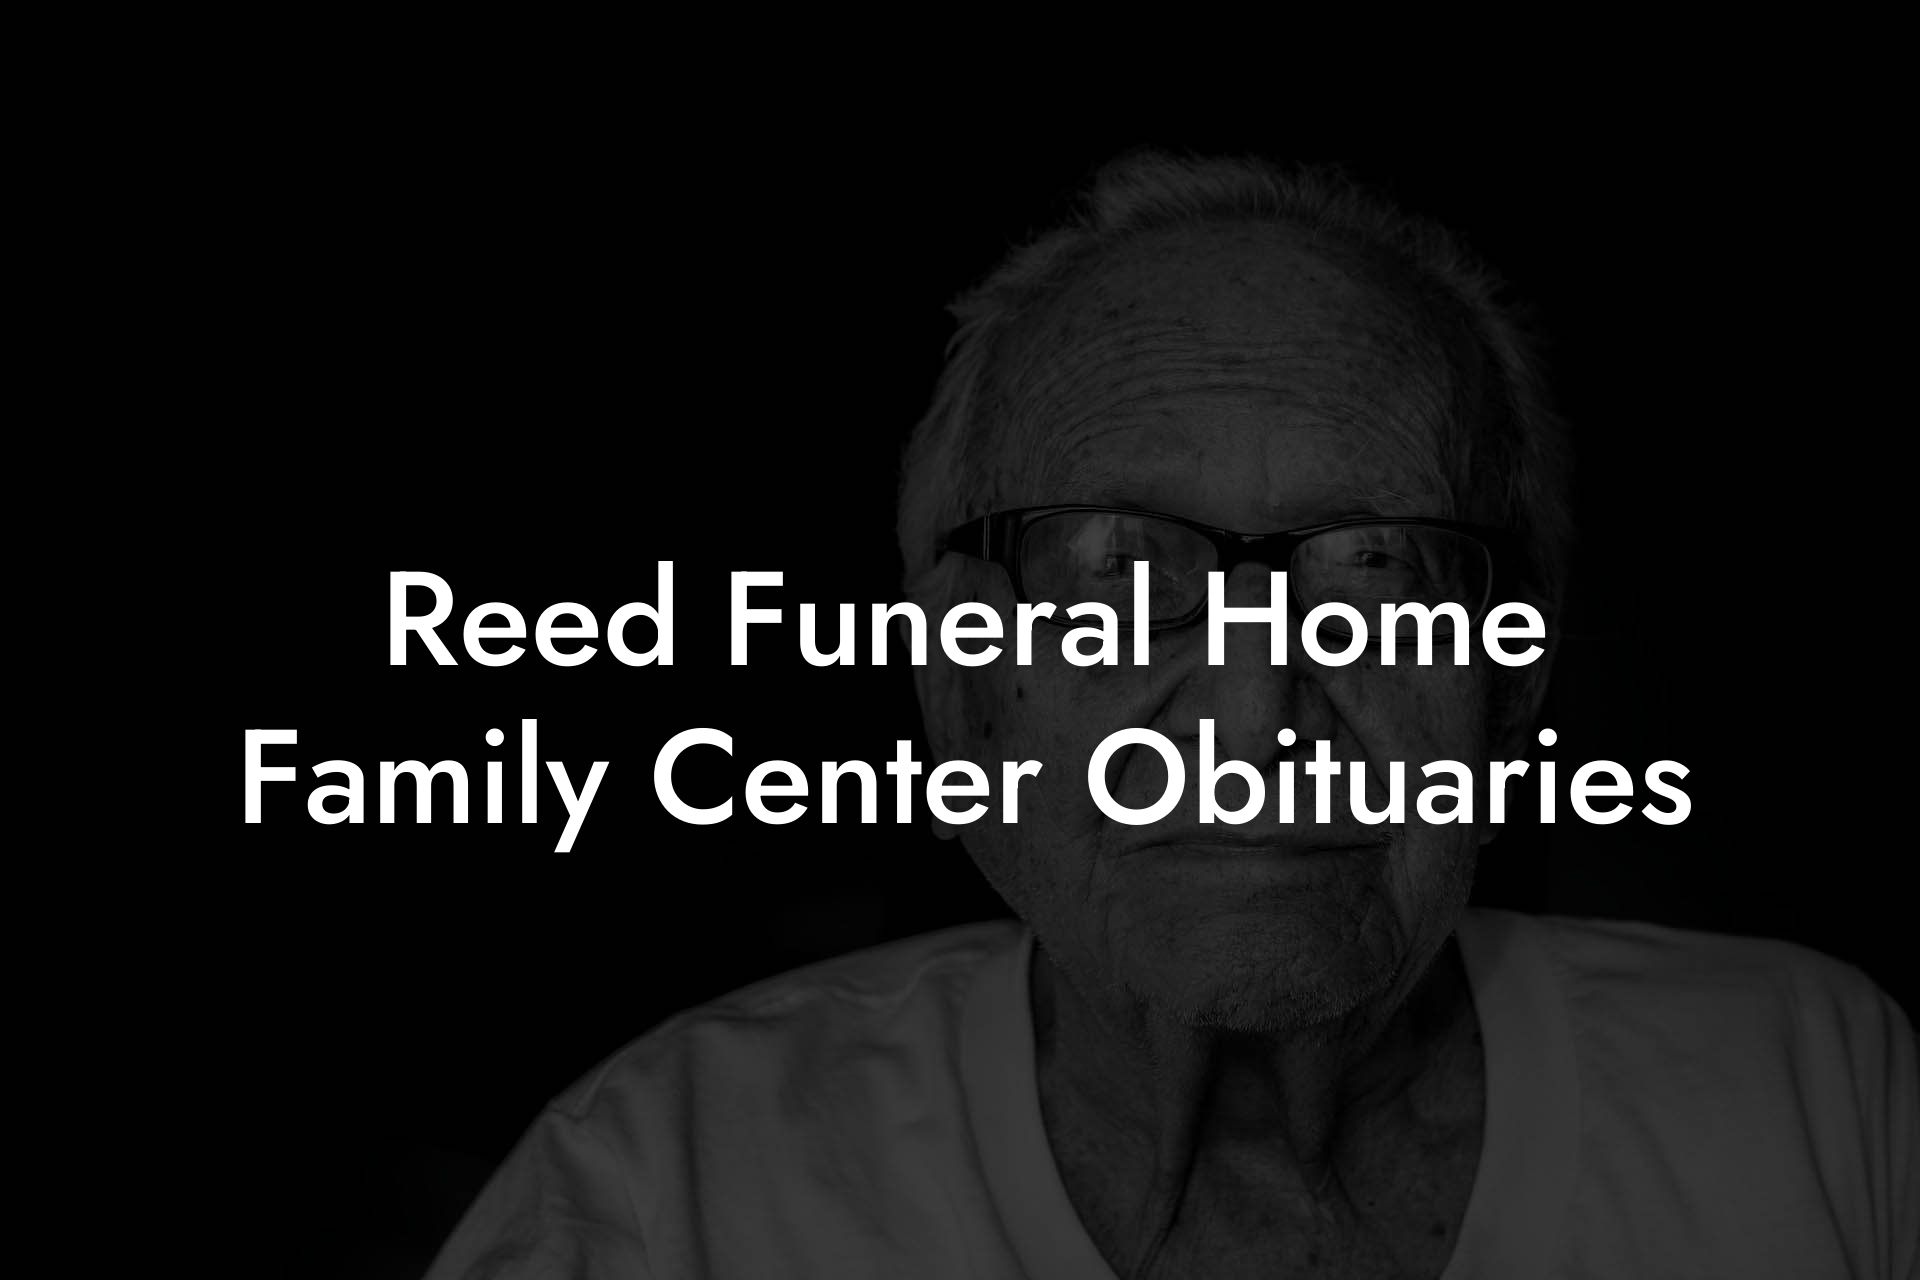 Reed Funeral Home Family Center Obituaries